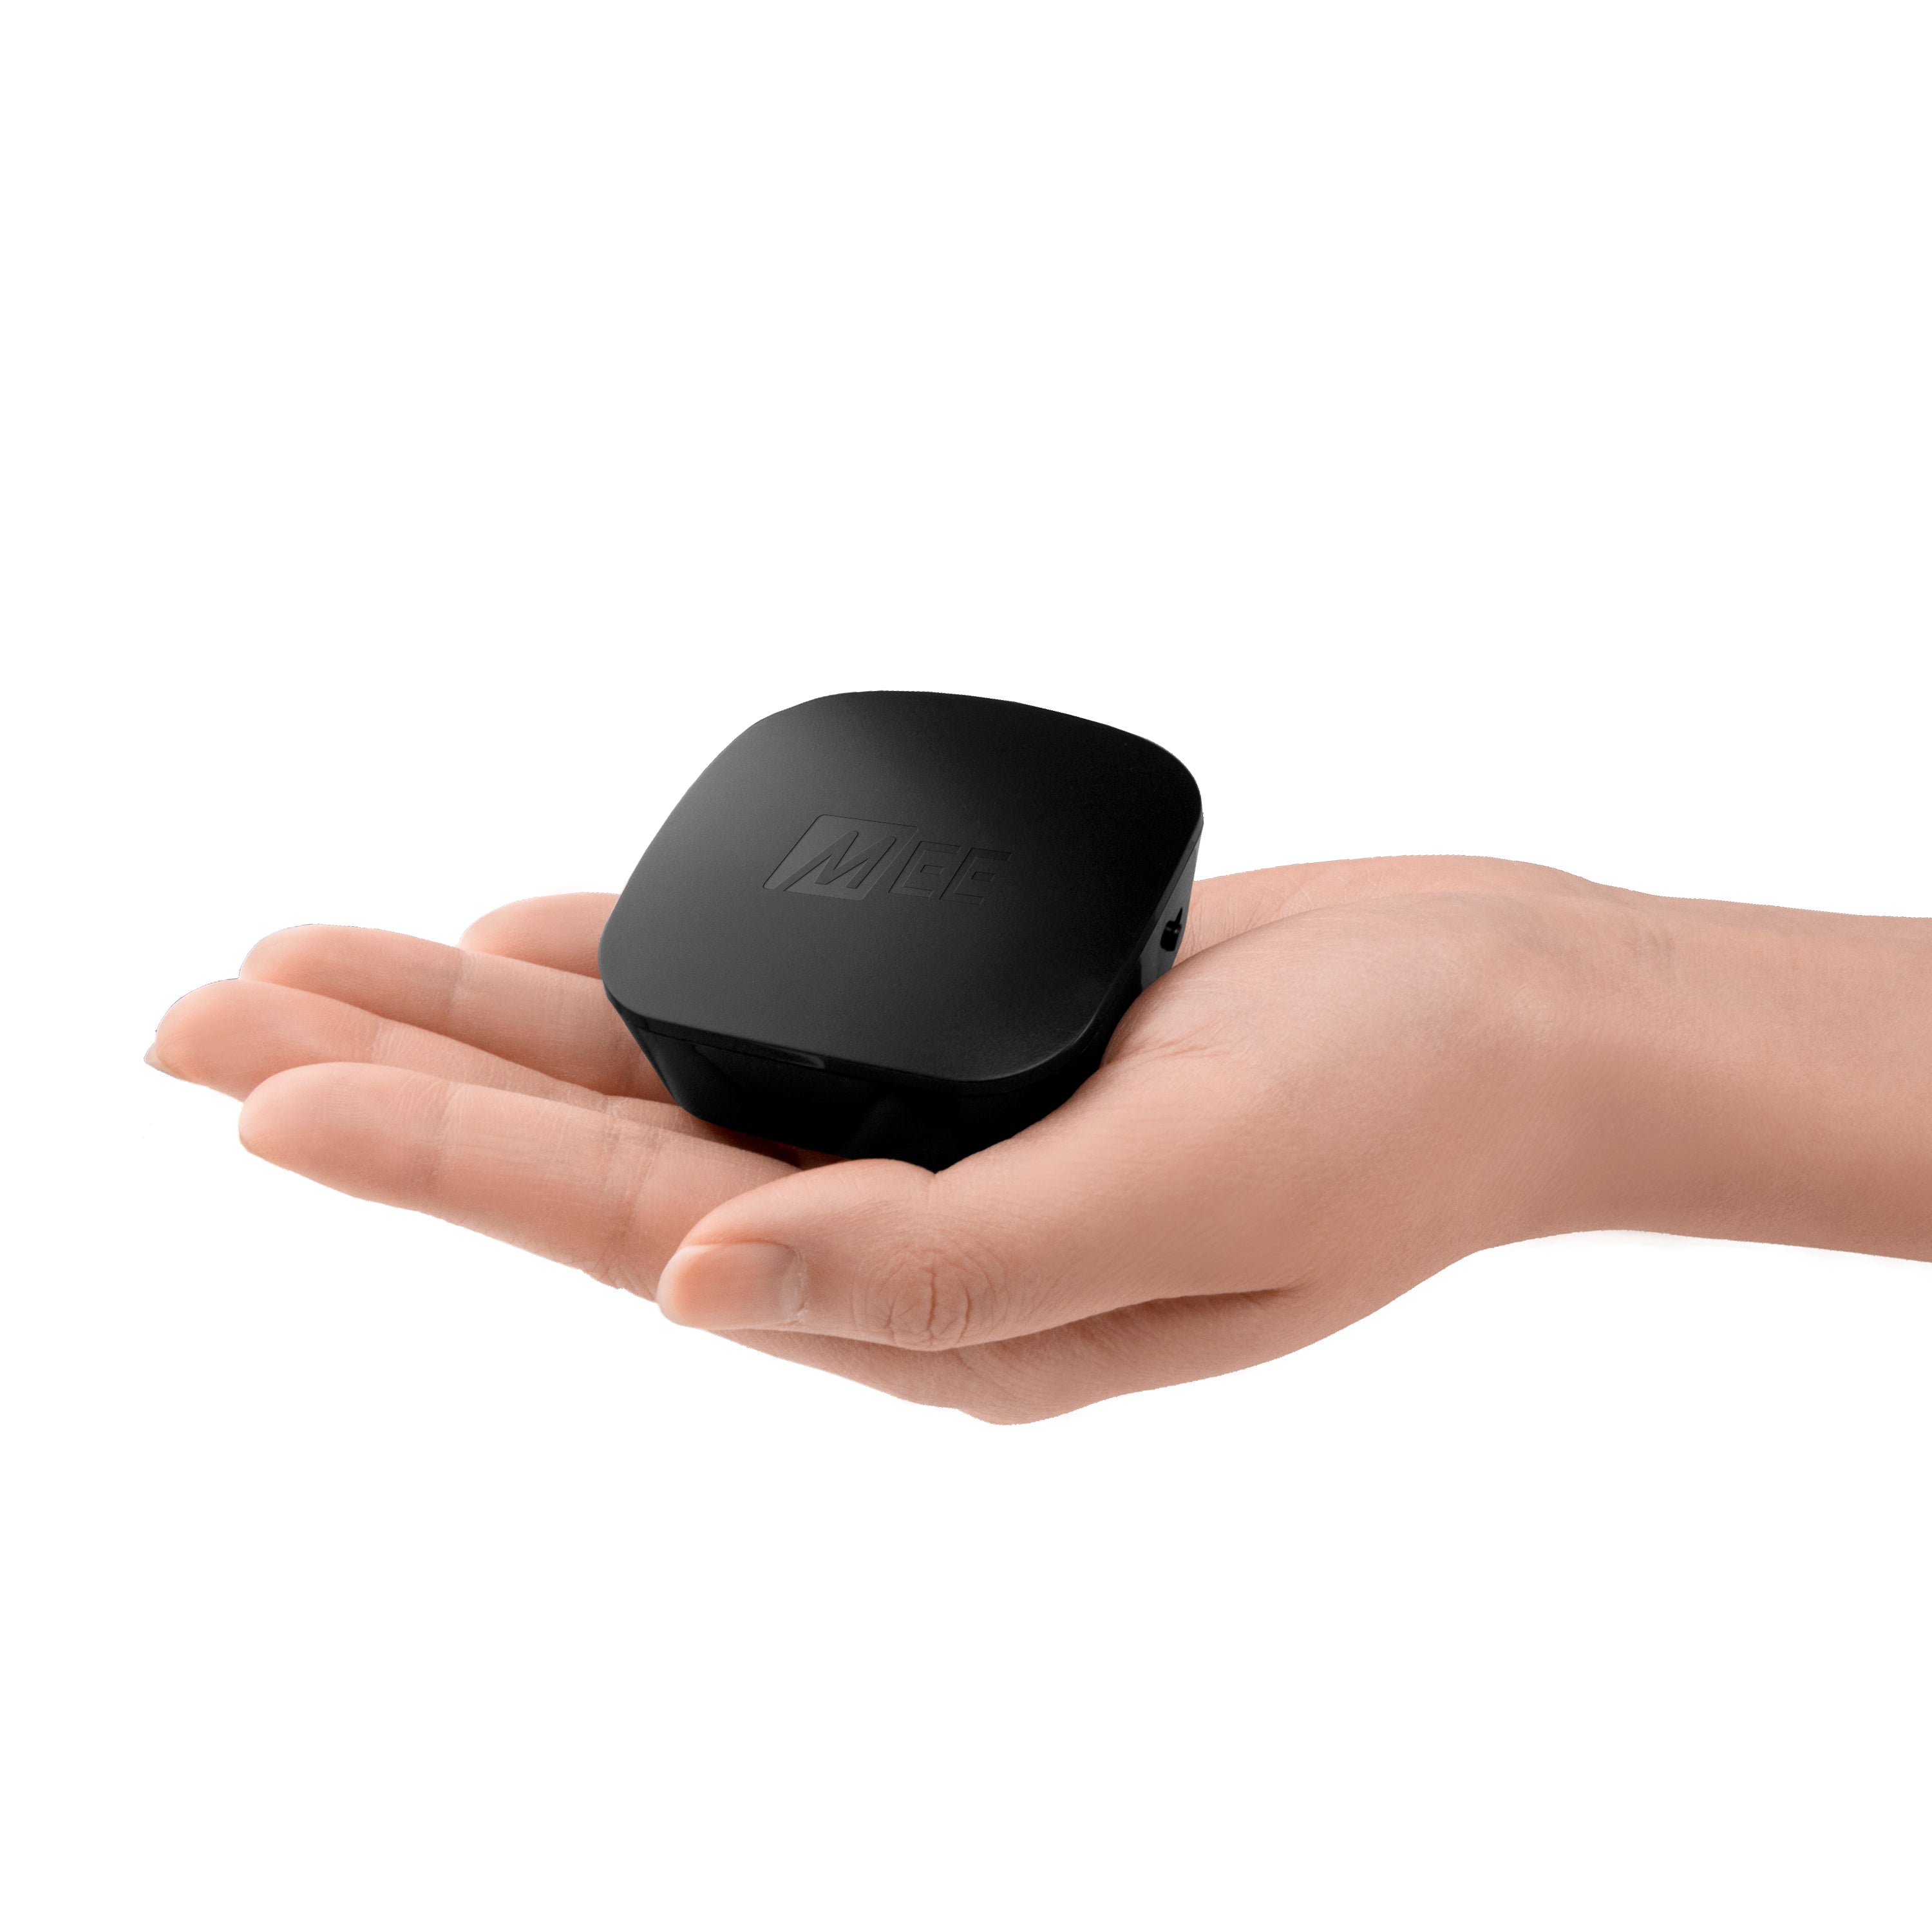 A human hand holds a small, black, cube-shaped electronic device with a discreet logo on top, isolated against a white background.